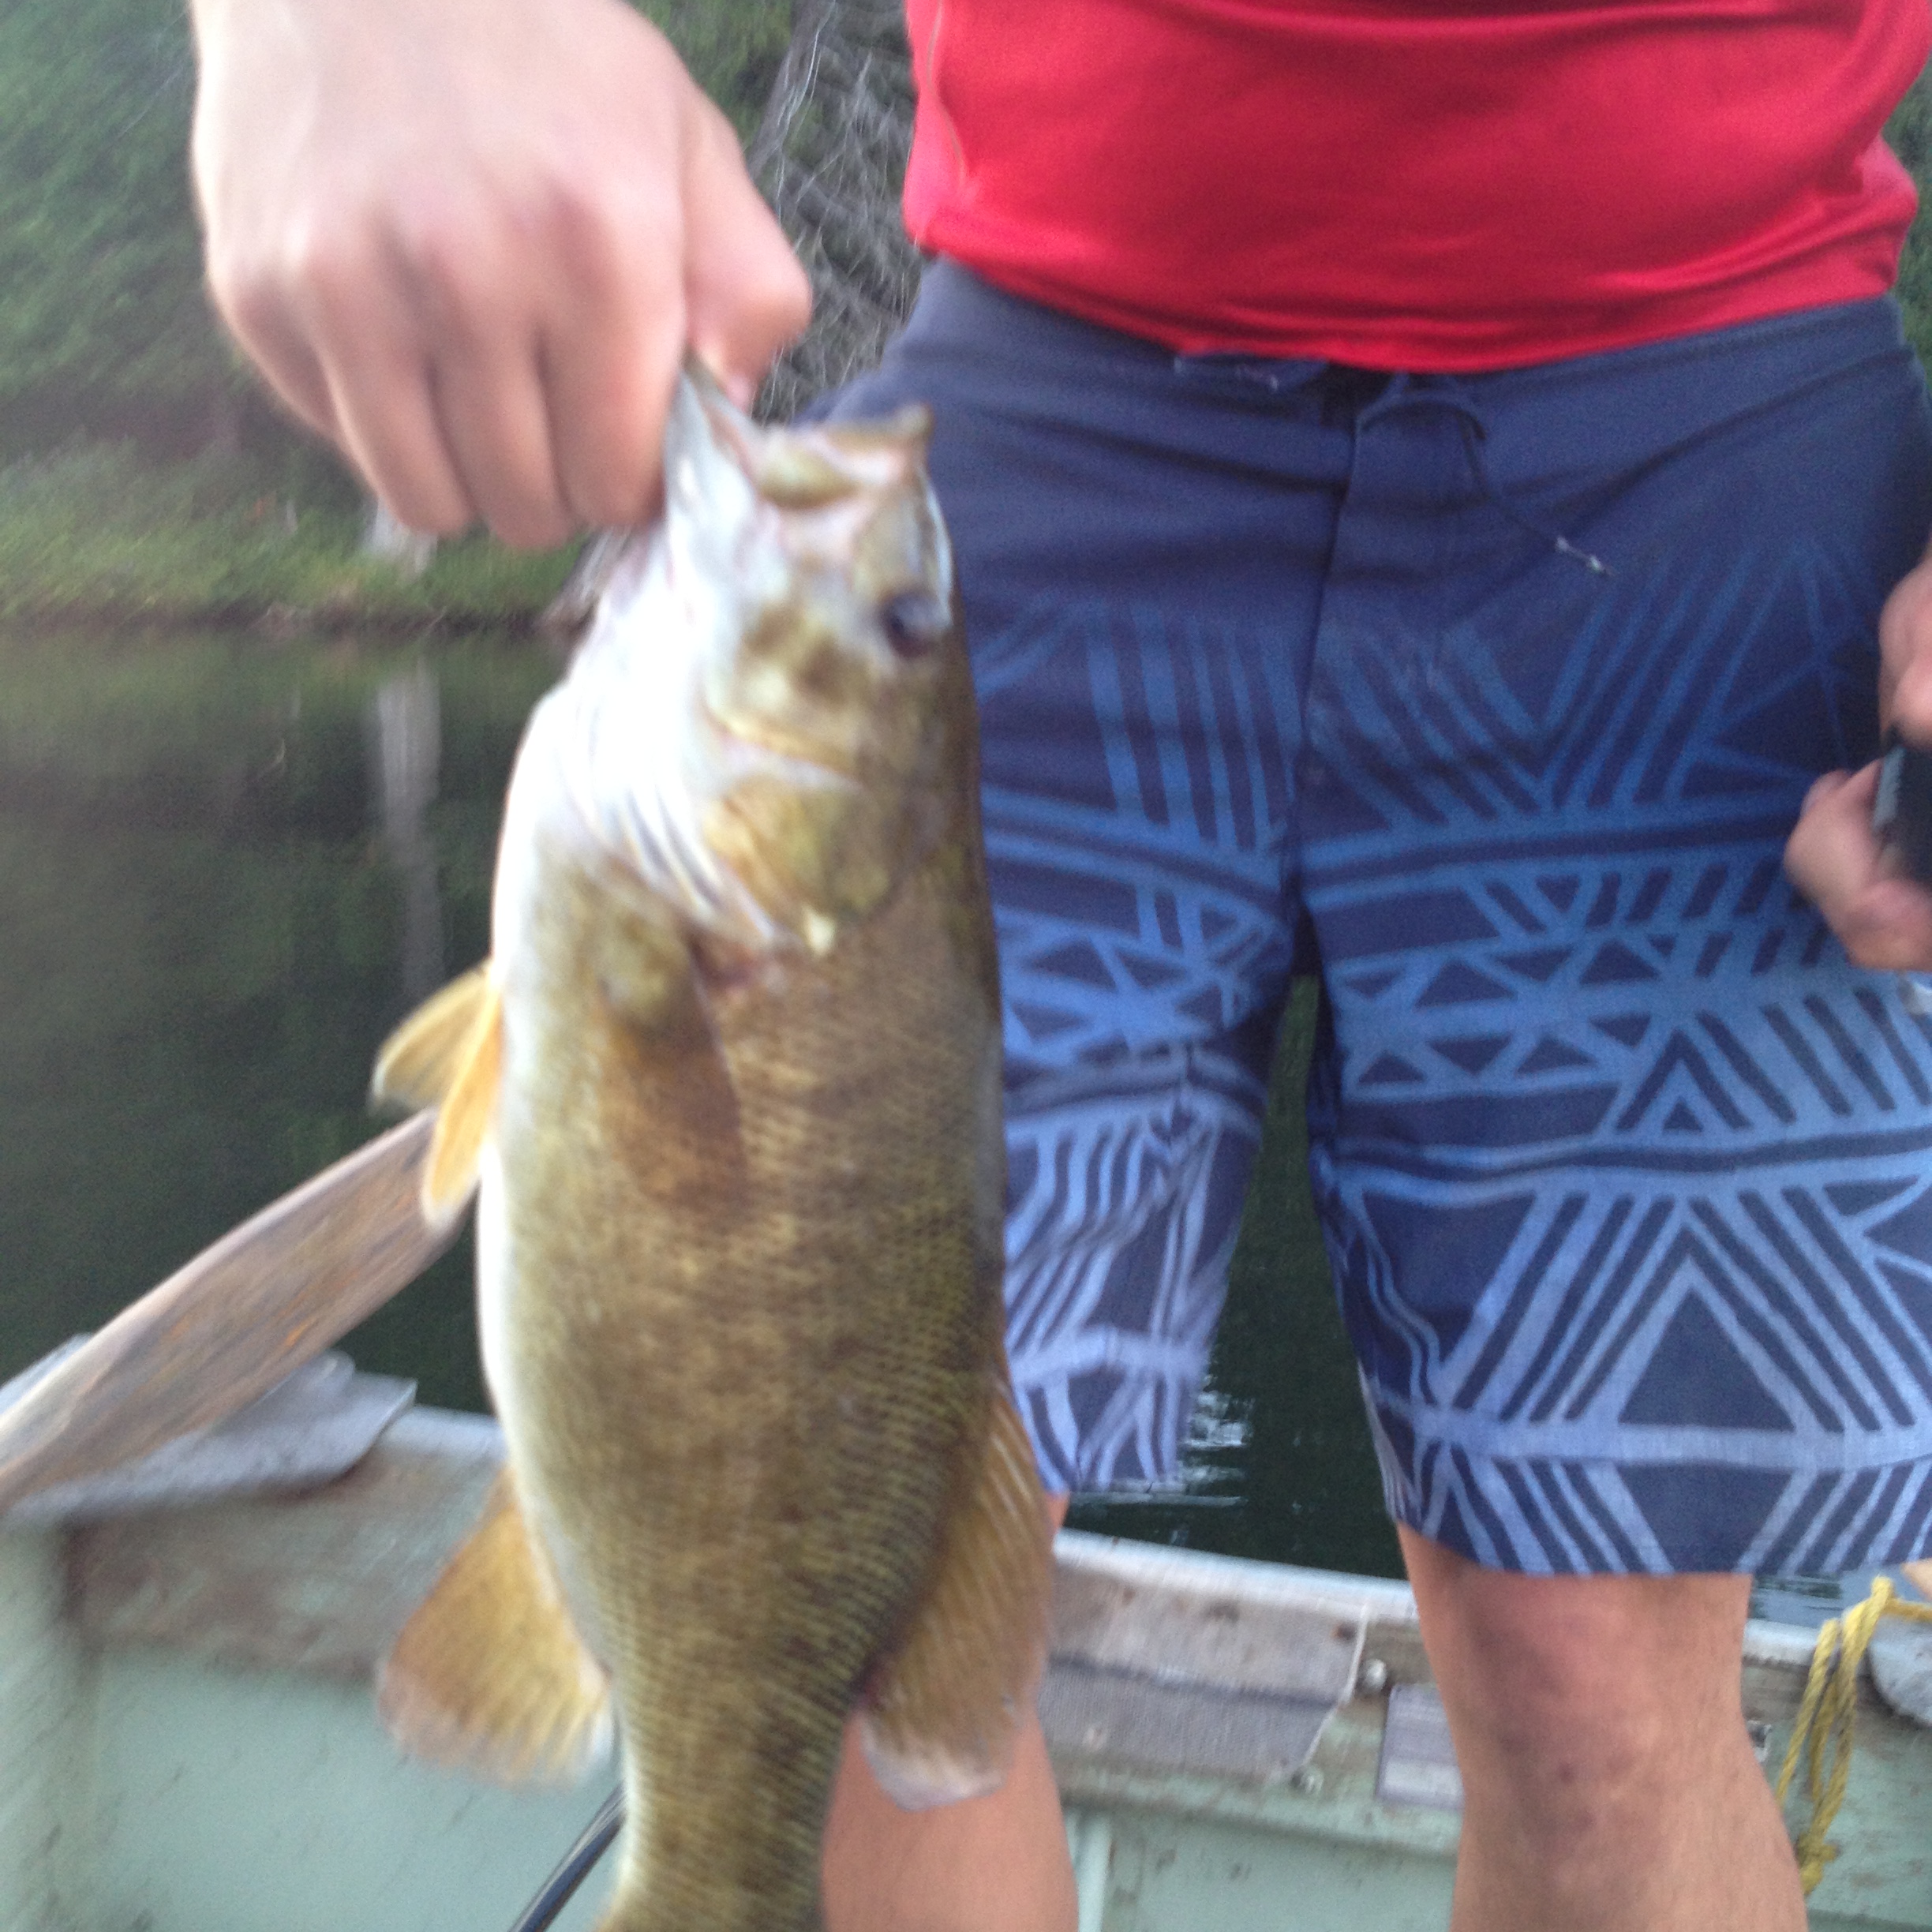 Just had a killer day on the lake slaying bass. All of them came in over 2lbs including a couple 3-4lbs